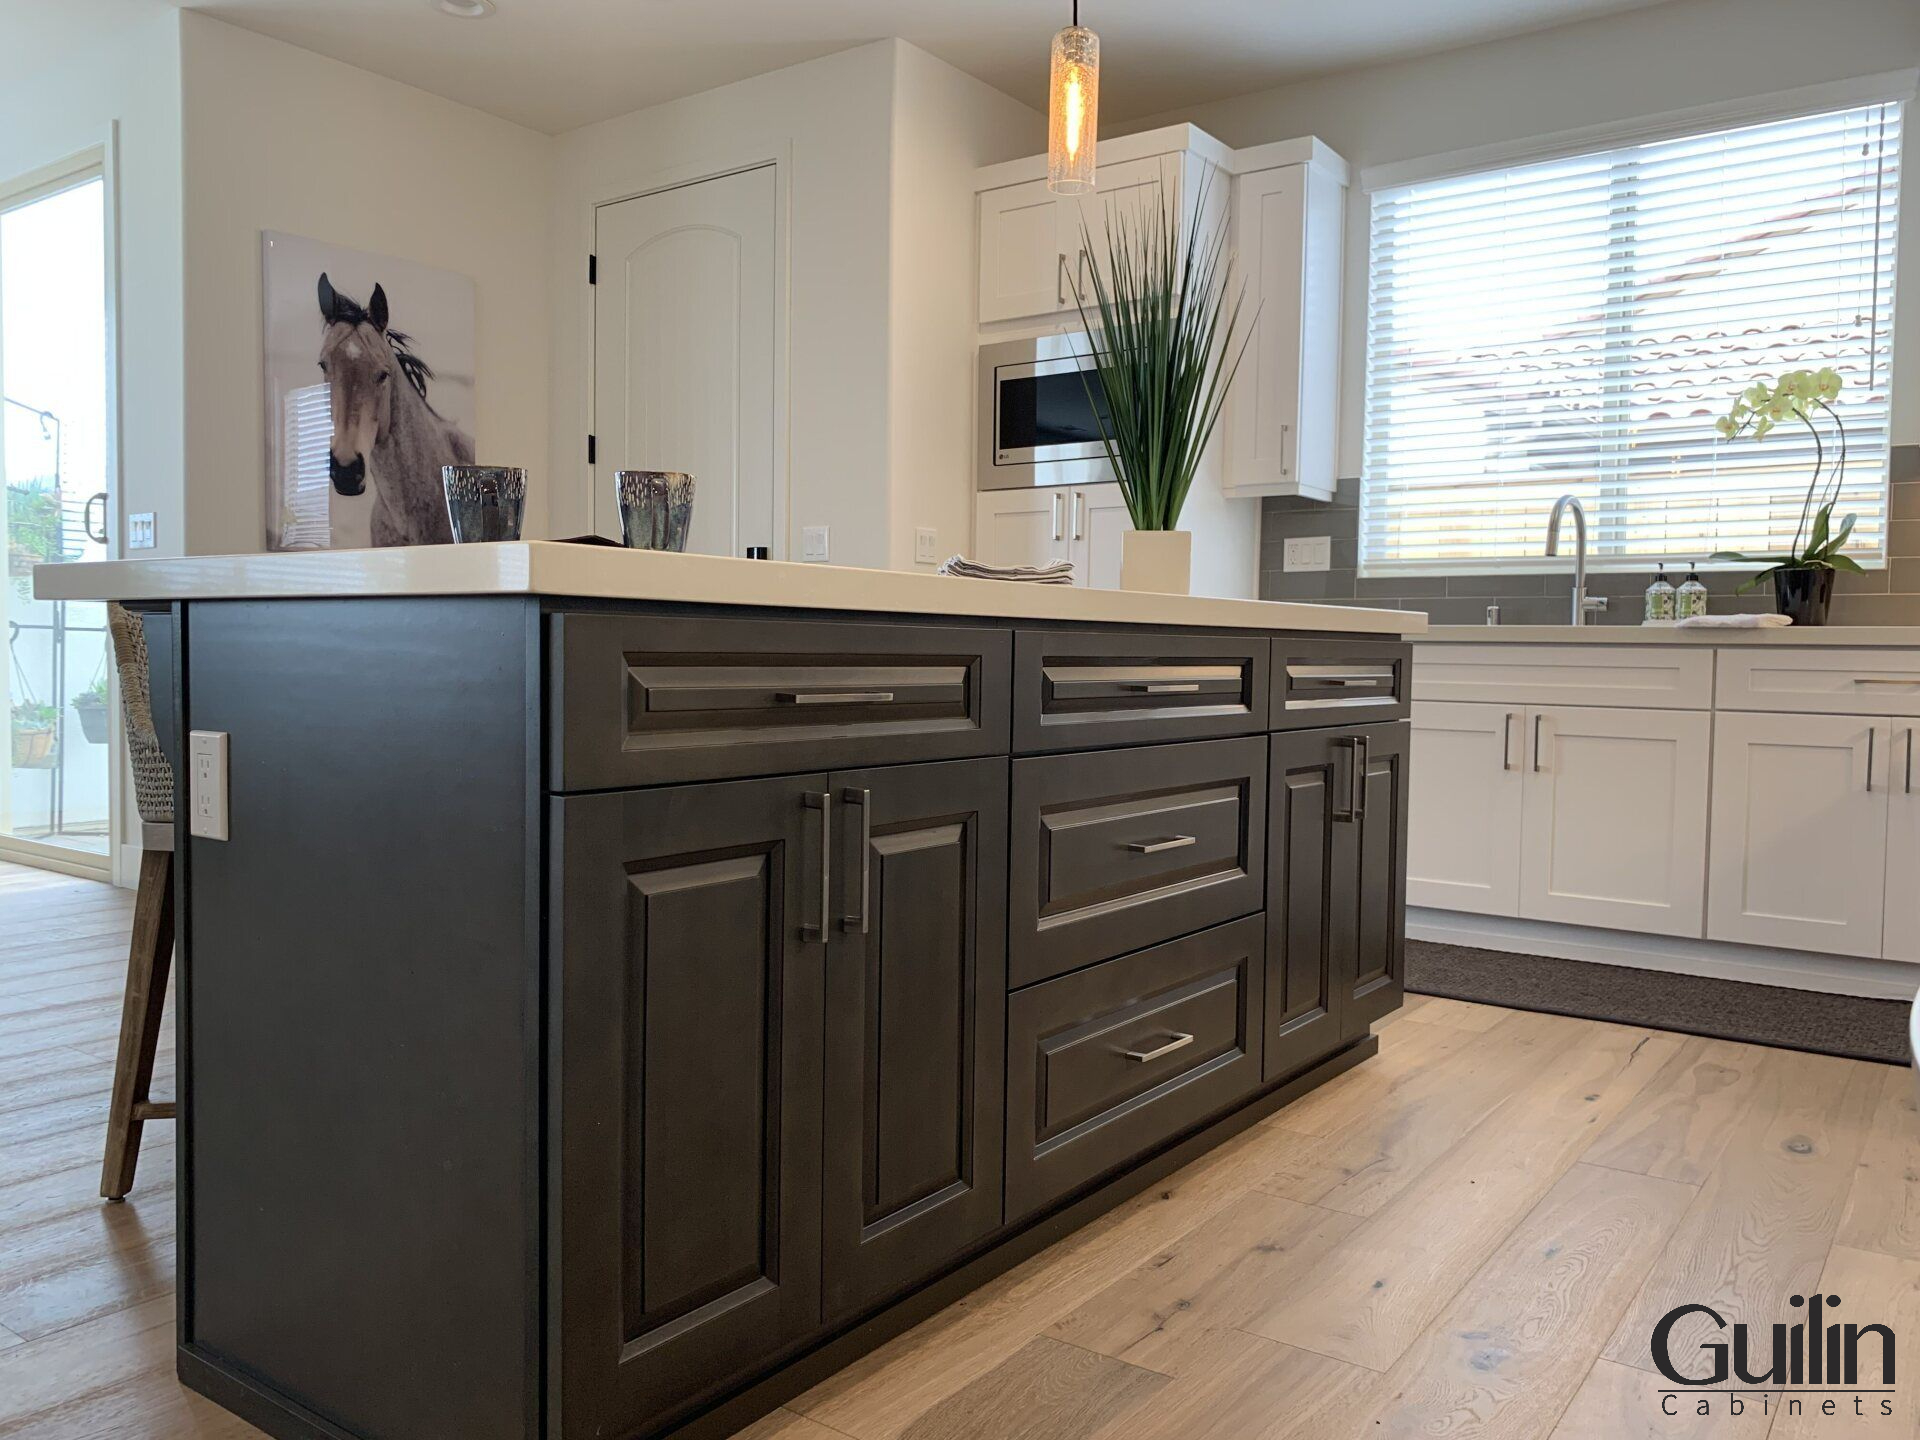 Adding a  kitchen island into the kitchen area you will have an extra counter space that is great for meal prep, as well as socializing with family and friends and is also great for entertaining.